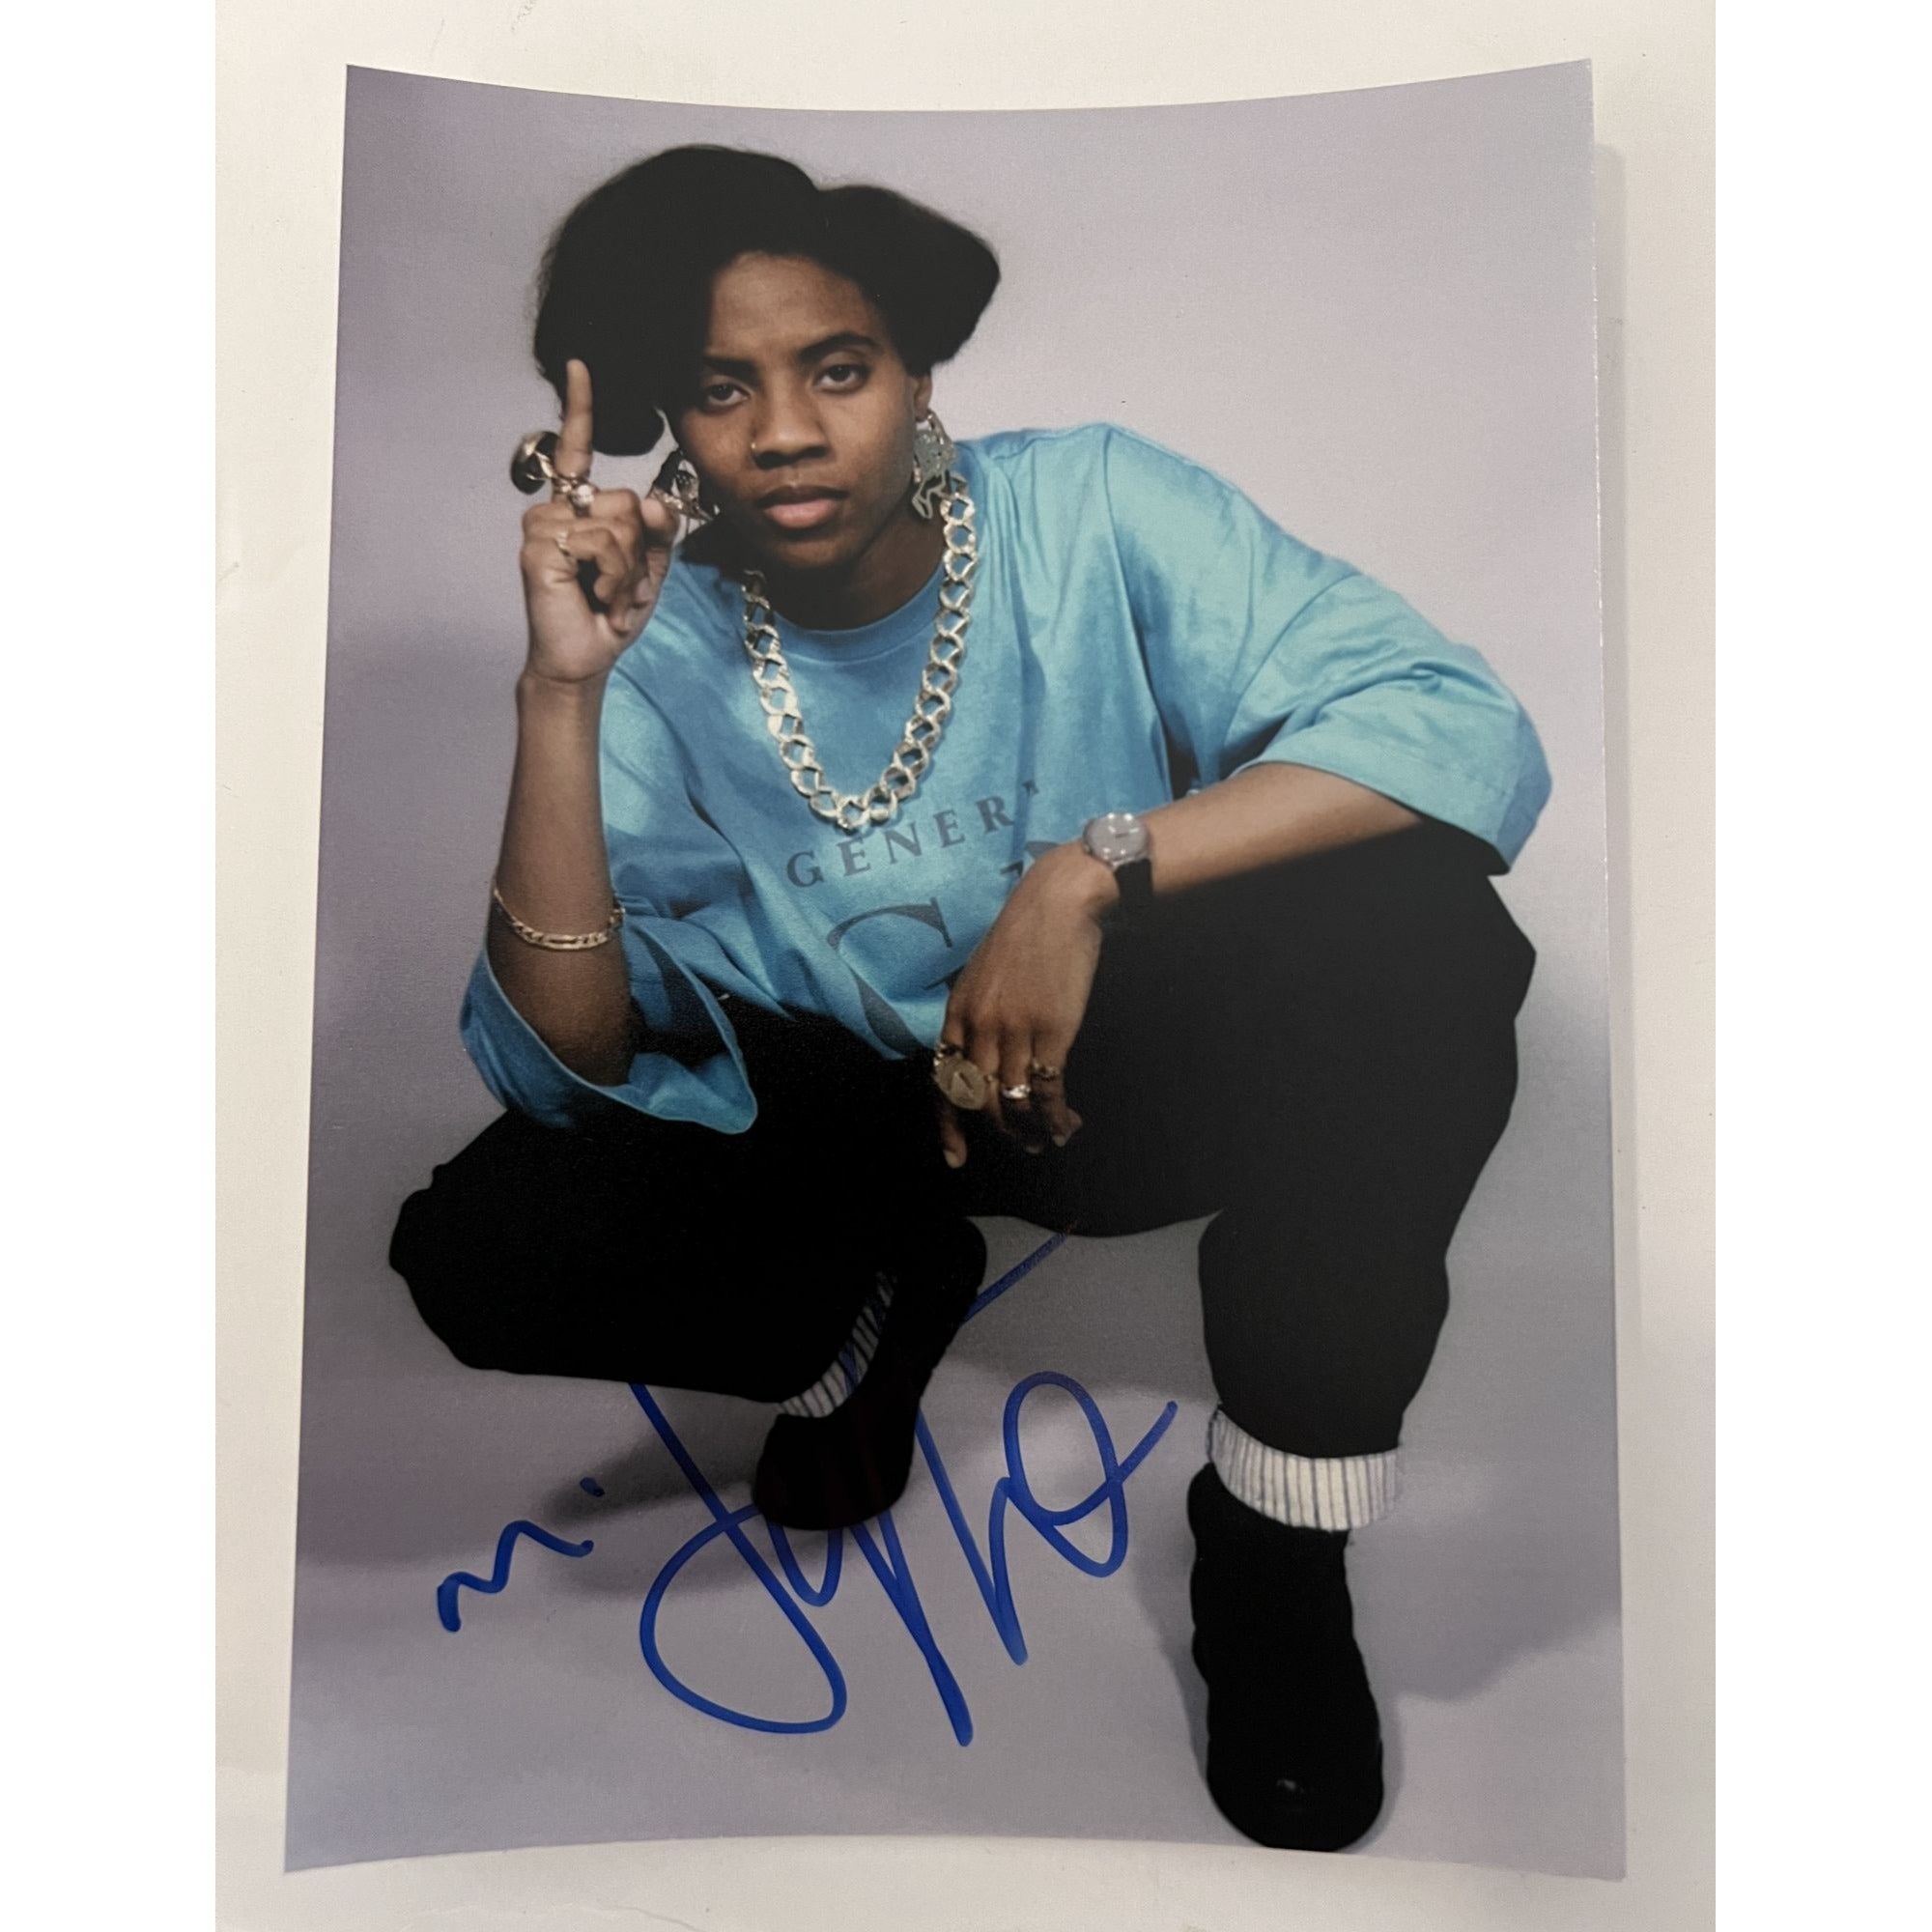 MC Lyte Lana Michele Moorer  5x7 photograph  signed with proof